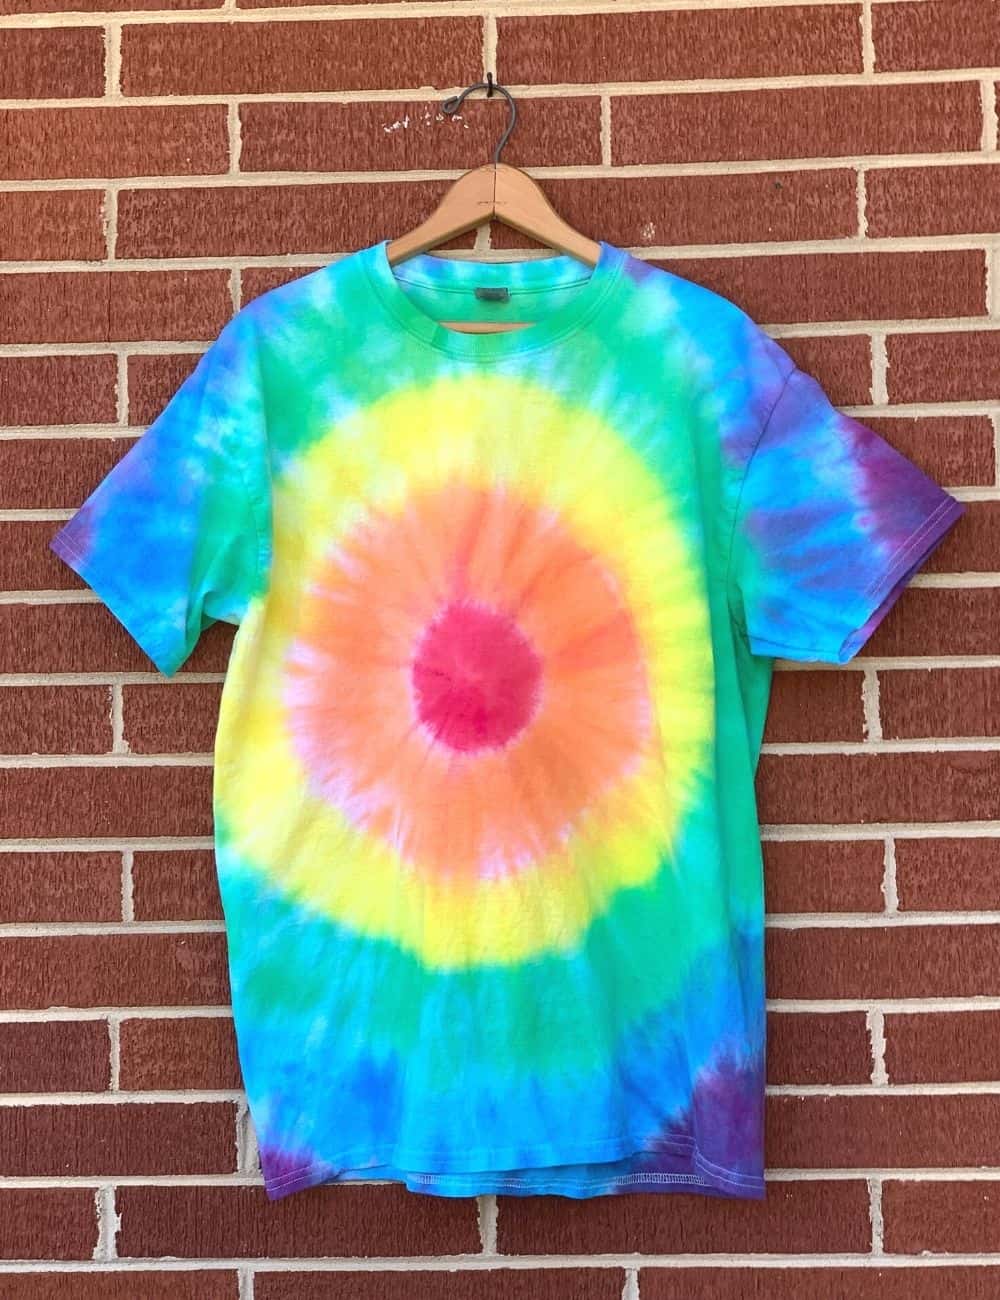 Tie Dye Bullseye: How To Make The Classic Tie Dye Pattern - Chaotically  Yours